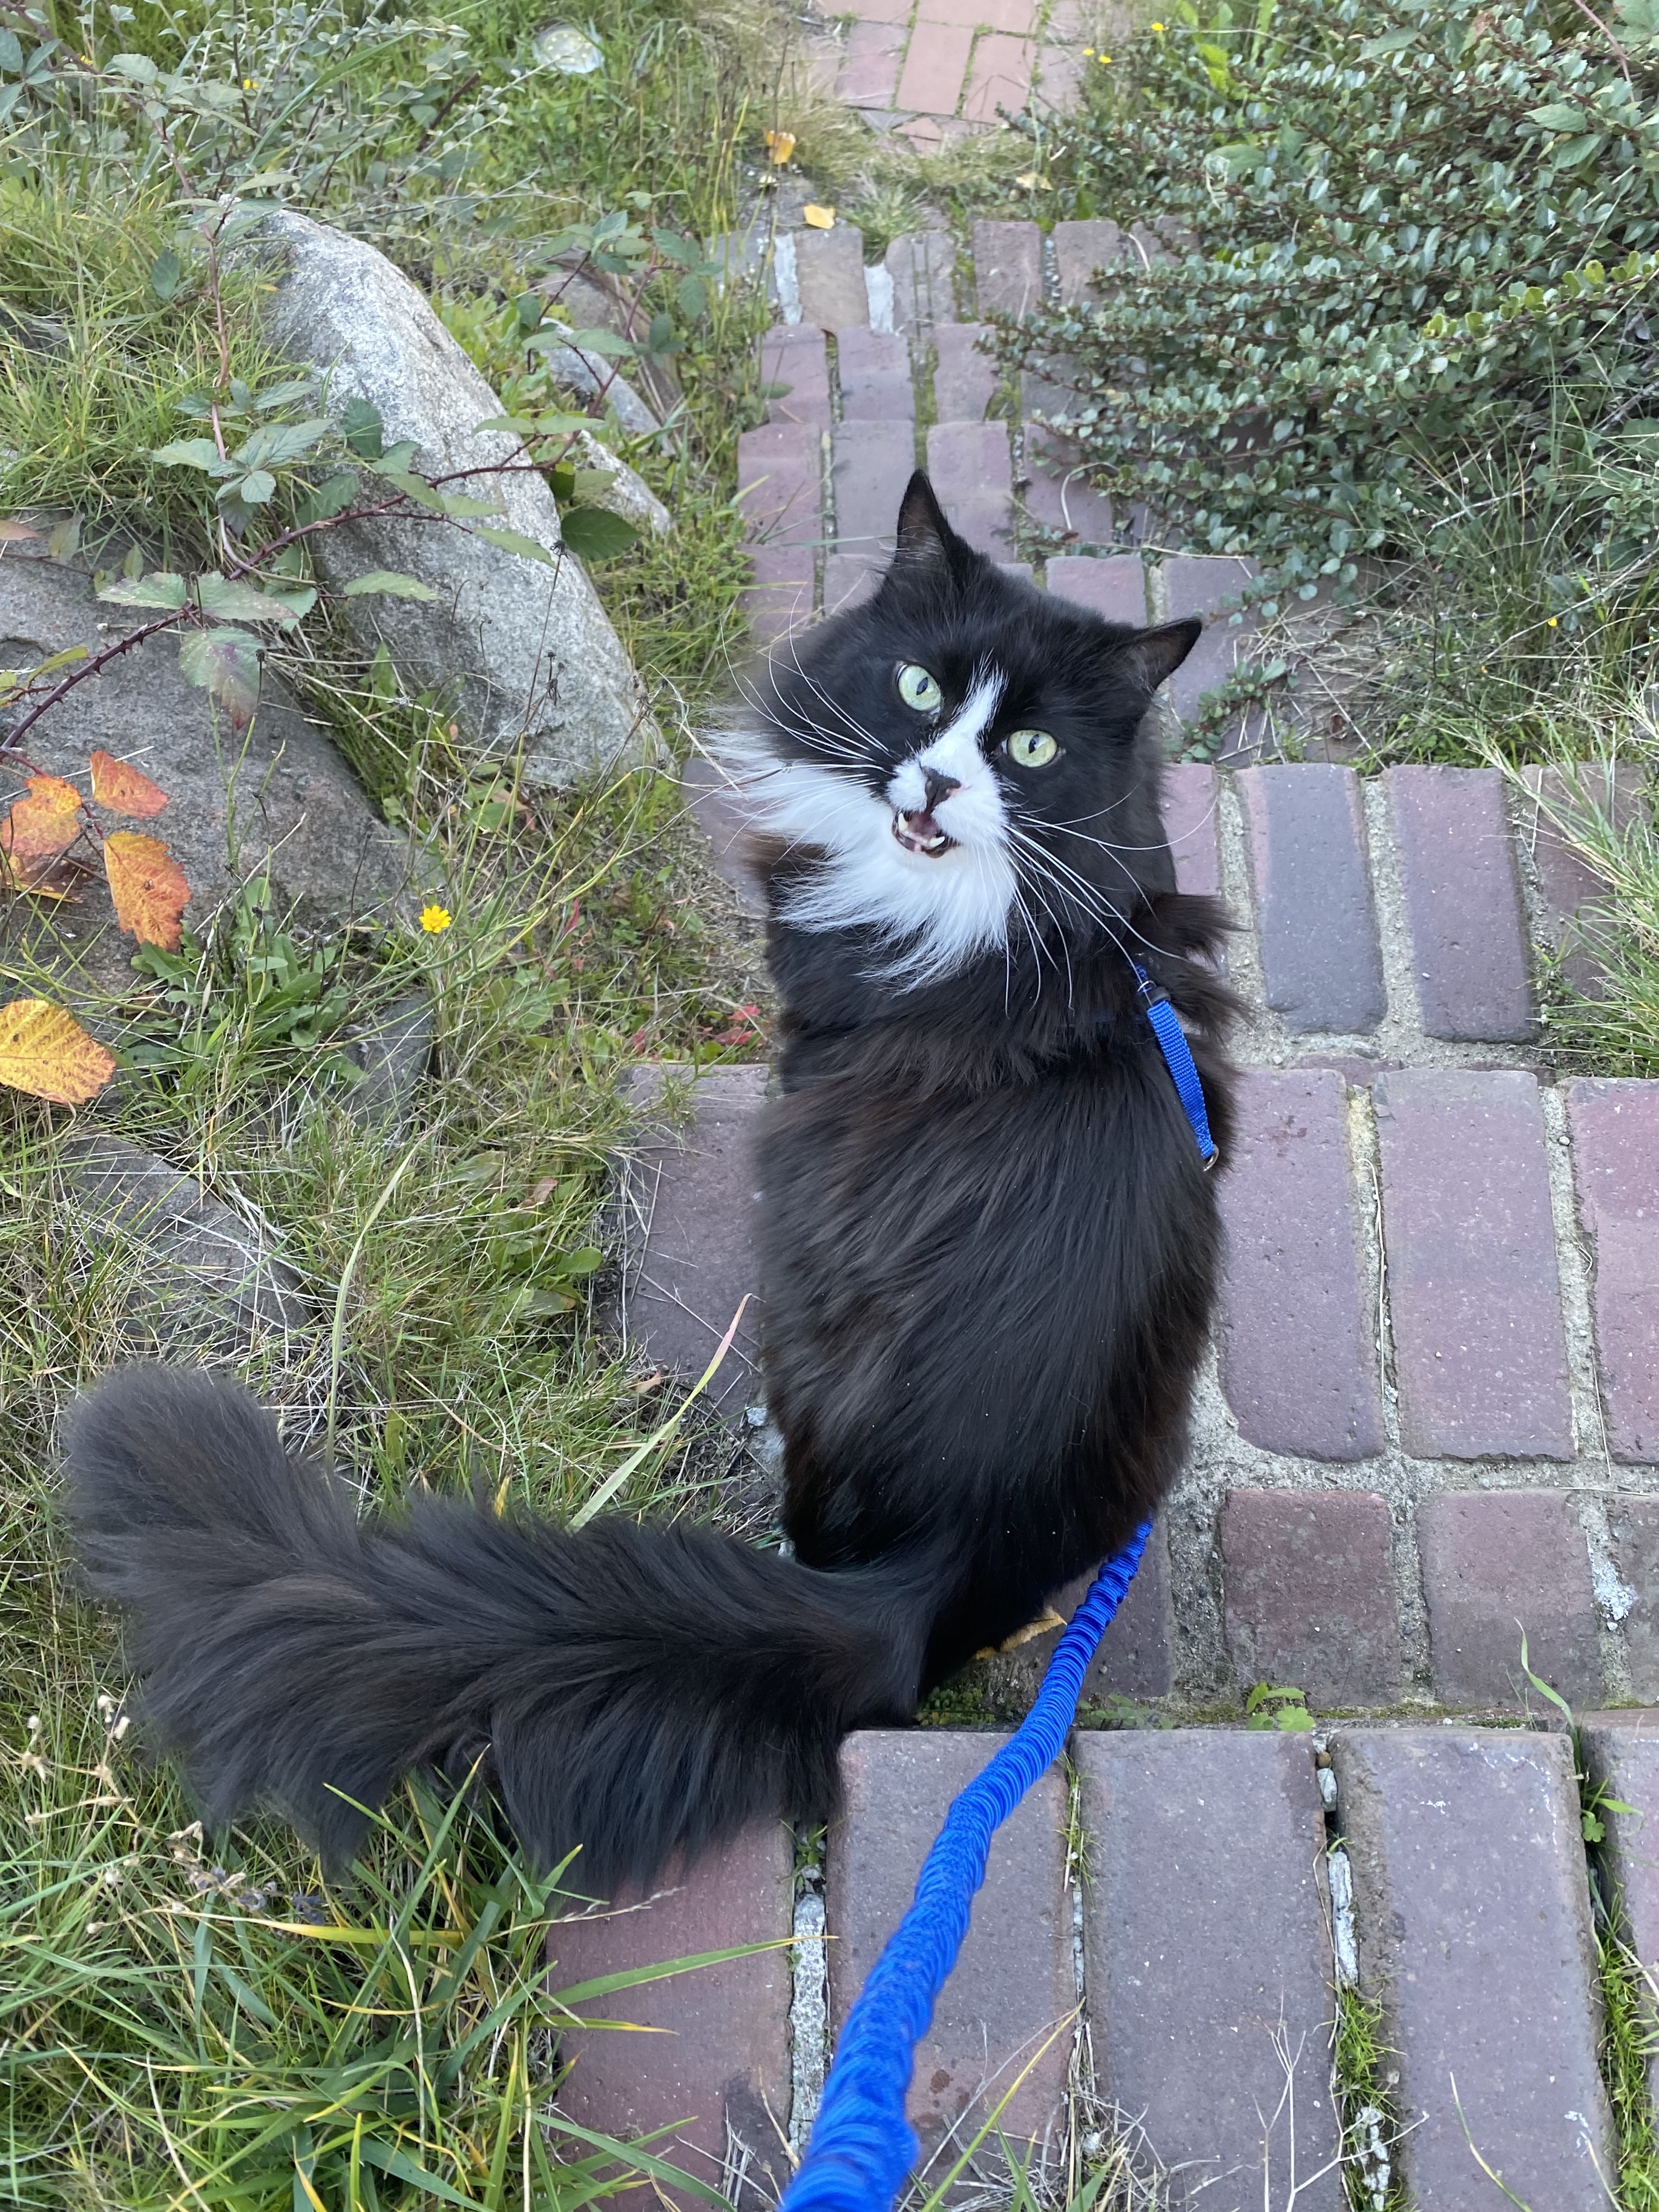 Emilie's cat, Jemima, meowing during a walk outside